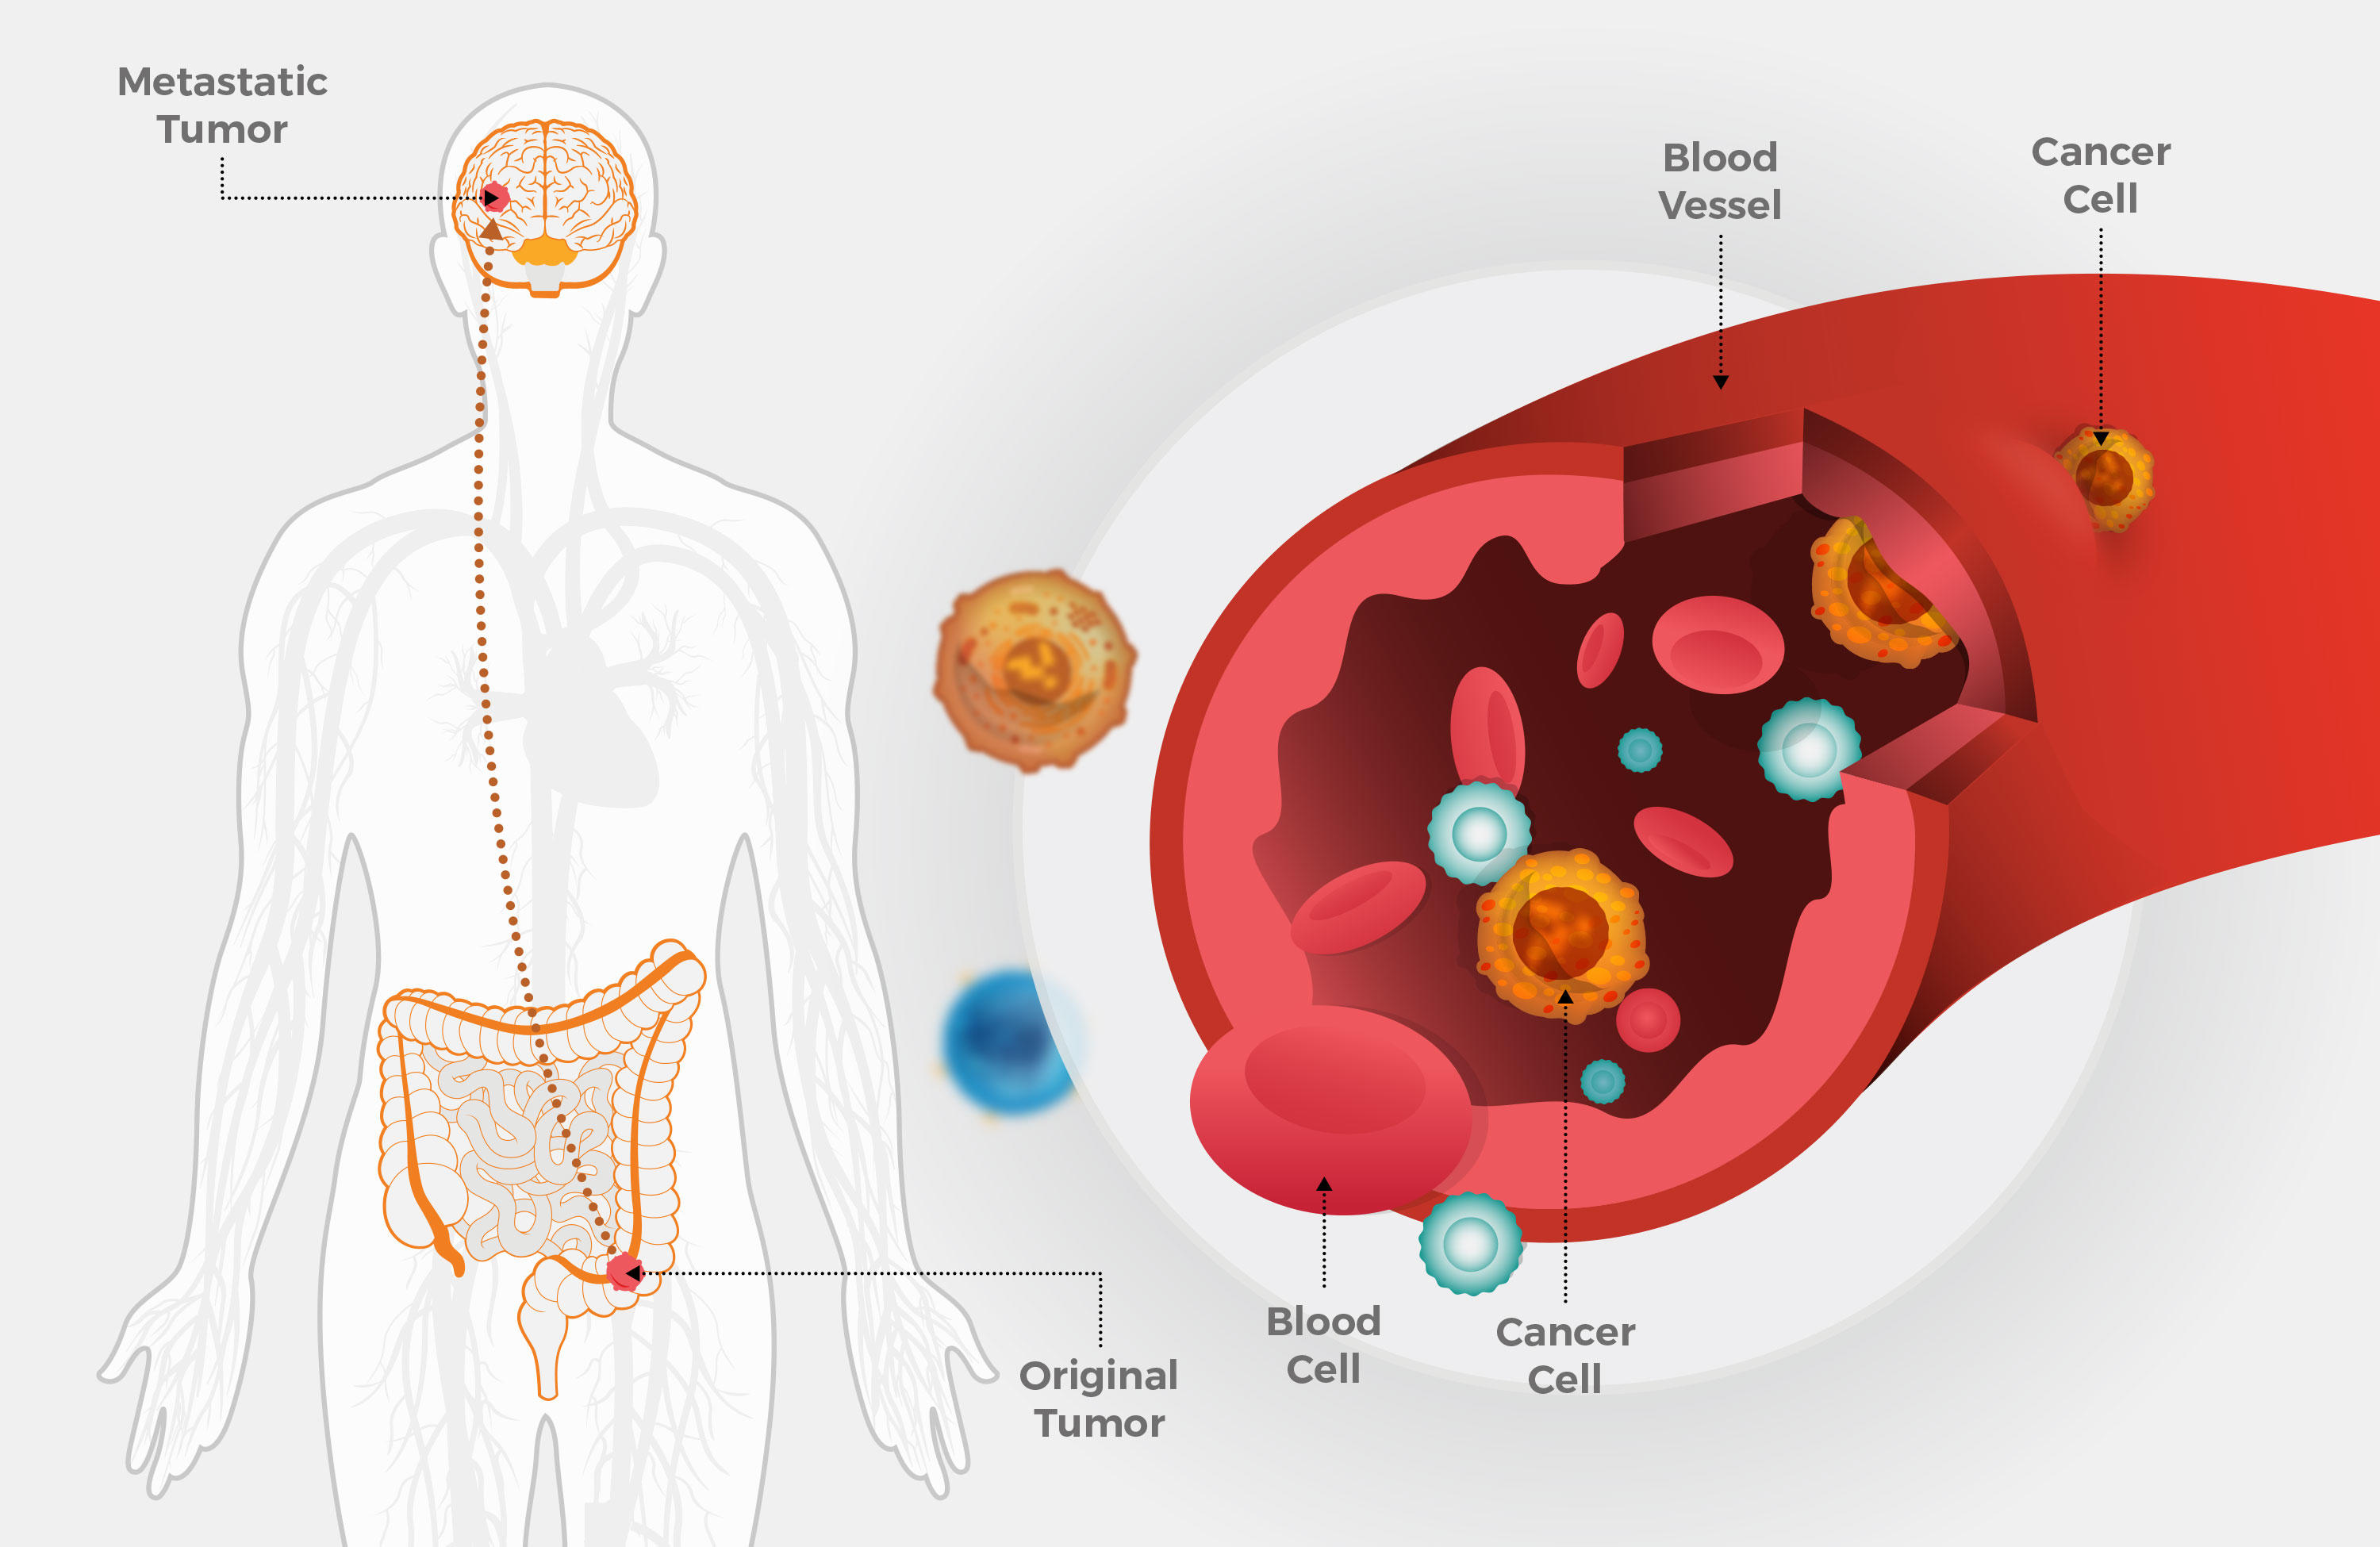 Cancer metastatic death. Romania Cancer Oranisations and Resources | CancerIndex